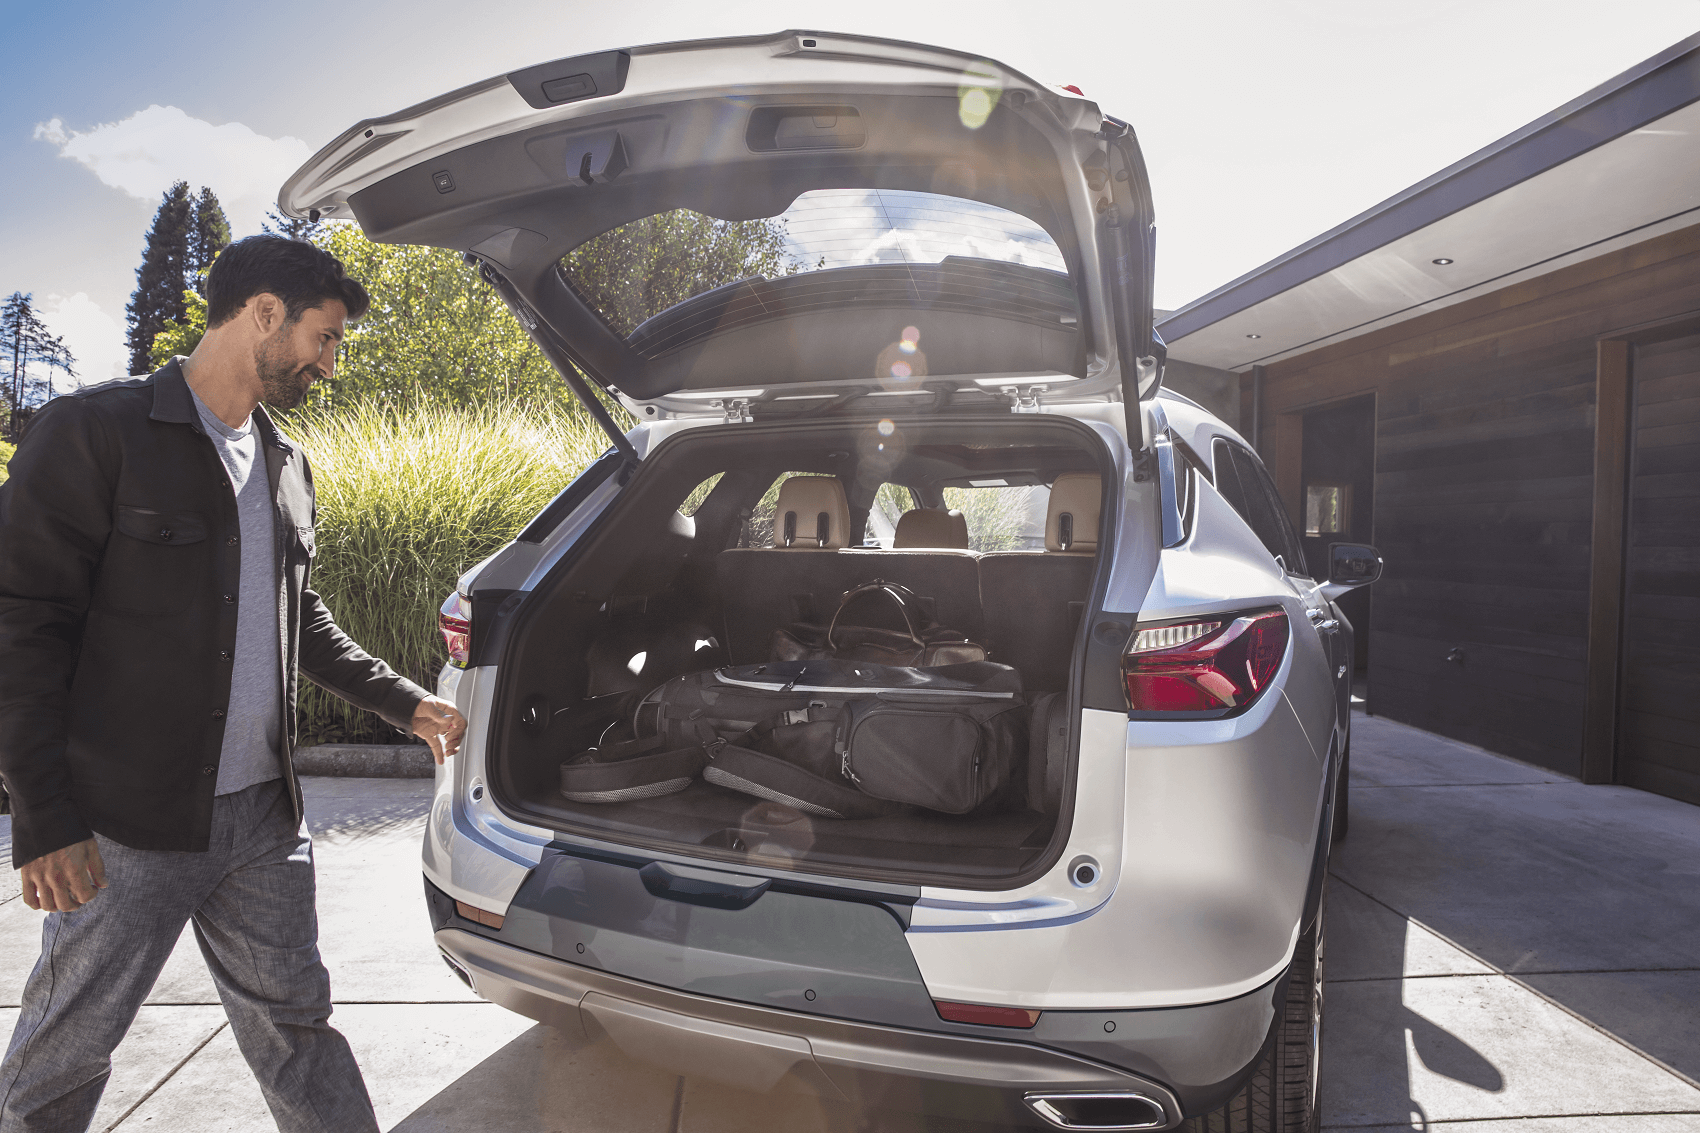 the open tailgate of a silver chevy blazer shows the blazer's cargo space volume